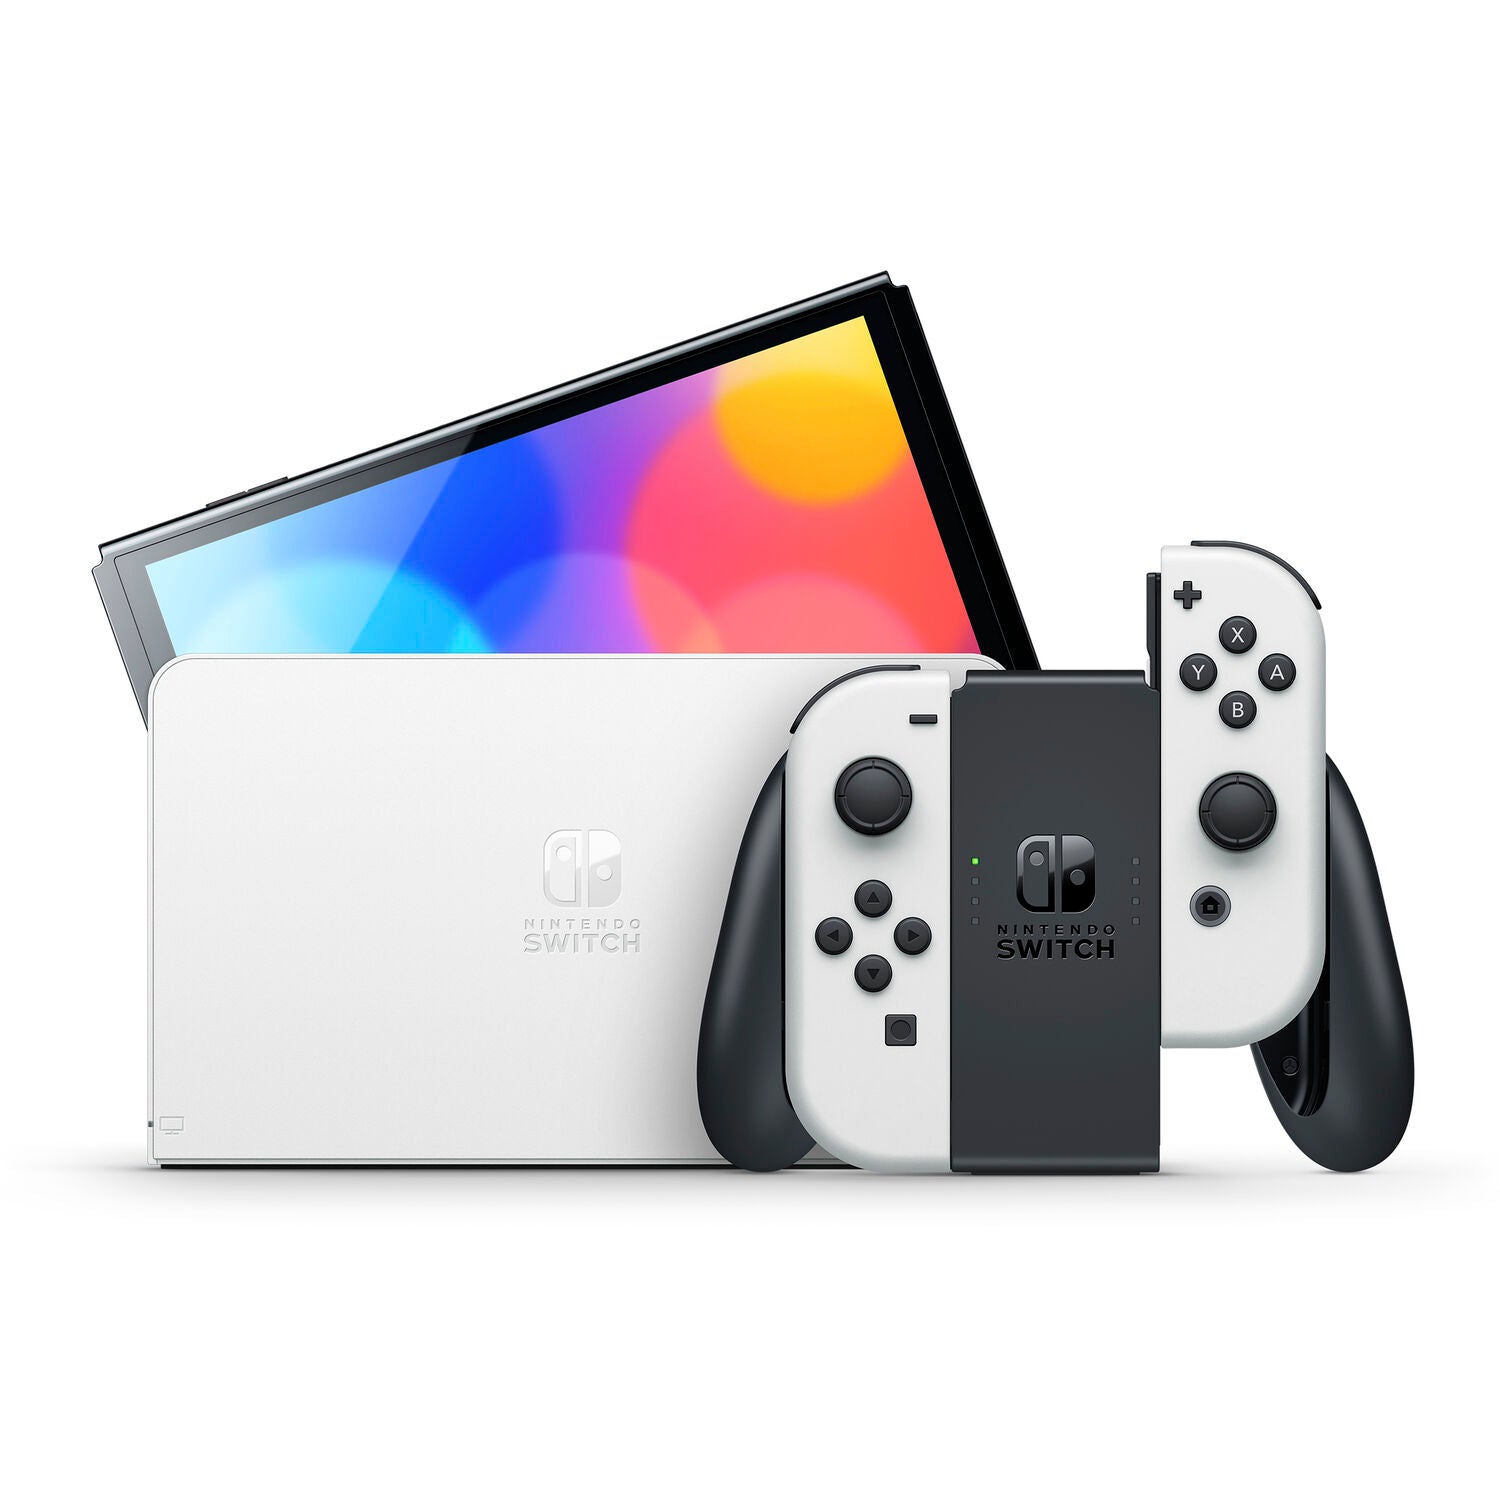 Nintendo Switch OLED Console White with Sandisk 128GB MicroSD Card, Pokemon Shining Pearl and Screen Cleaning Cloth - Pro-Distributing